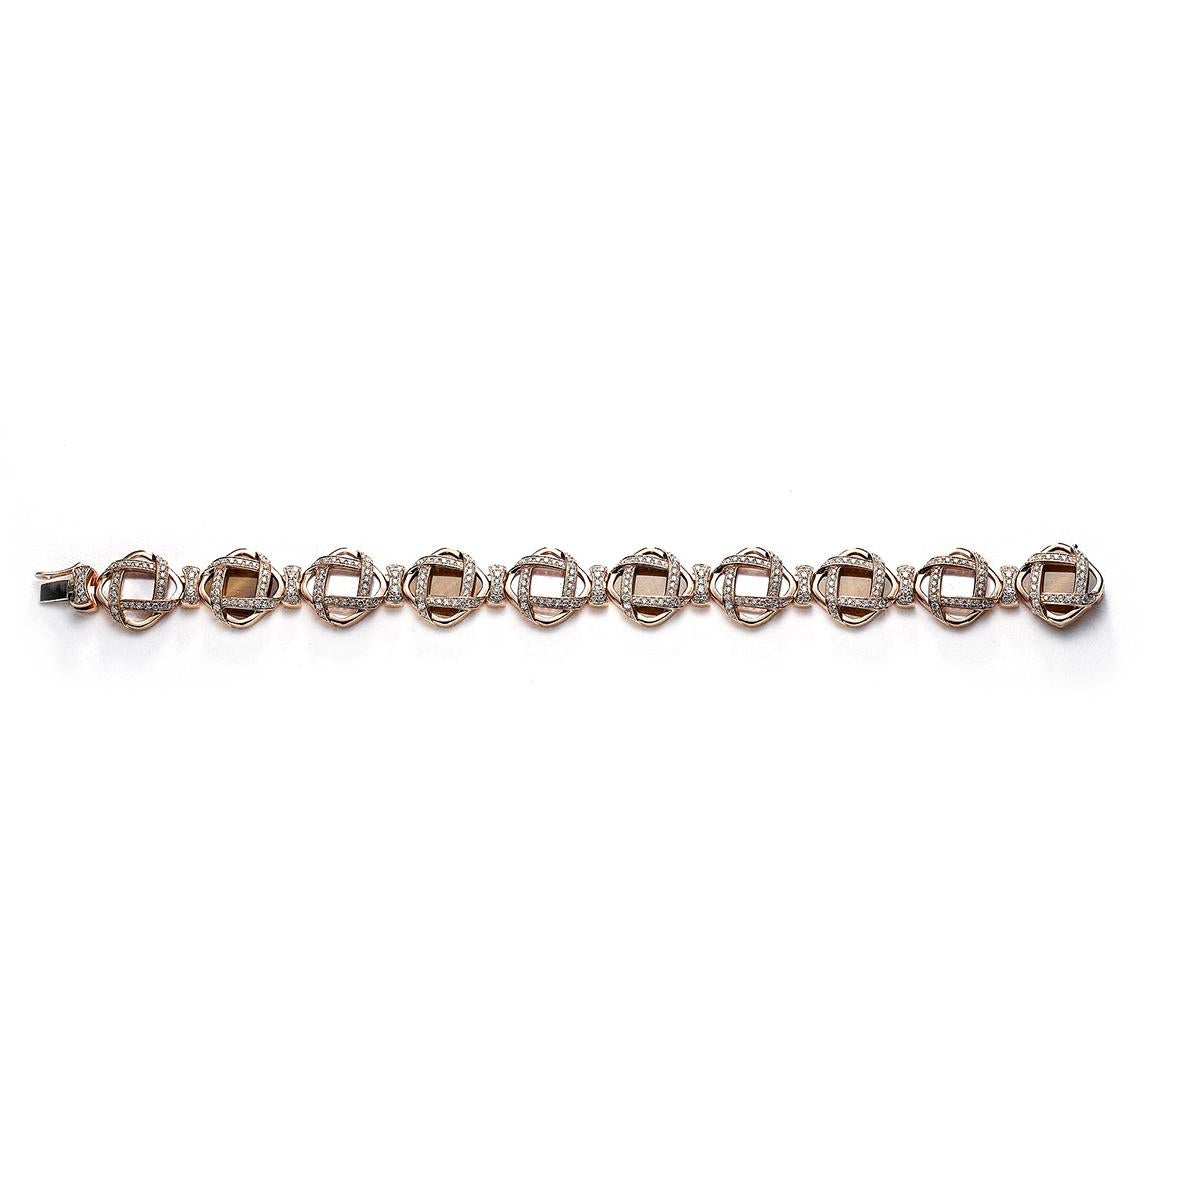 Bracelet in 18kt pink gold set with 350 diamonds 2.77 cts, 5 mother-of-pearl  11.39 cts and 5 tiger eye 9.74 cts       